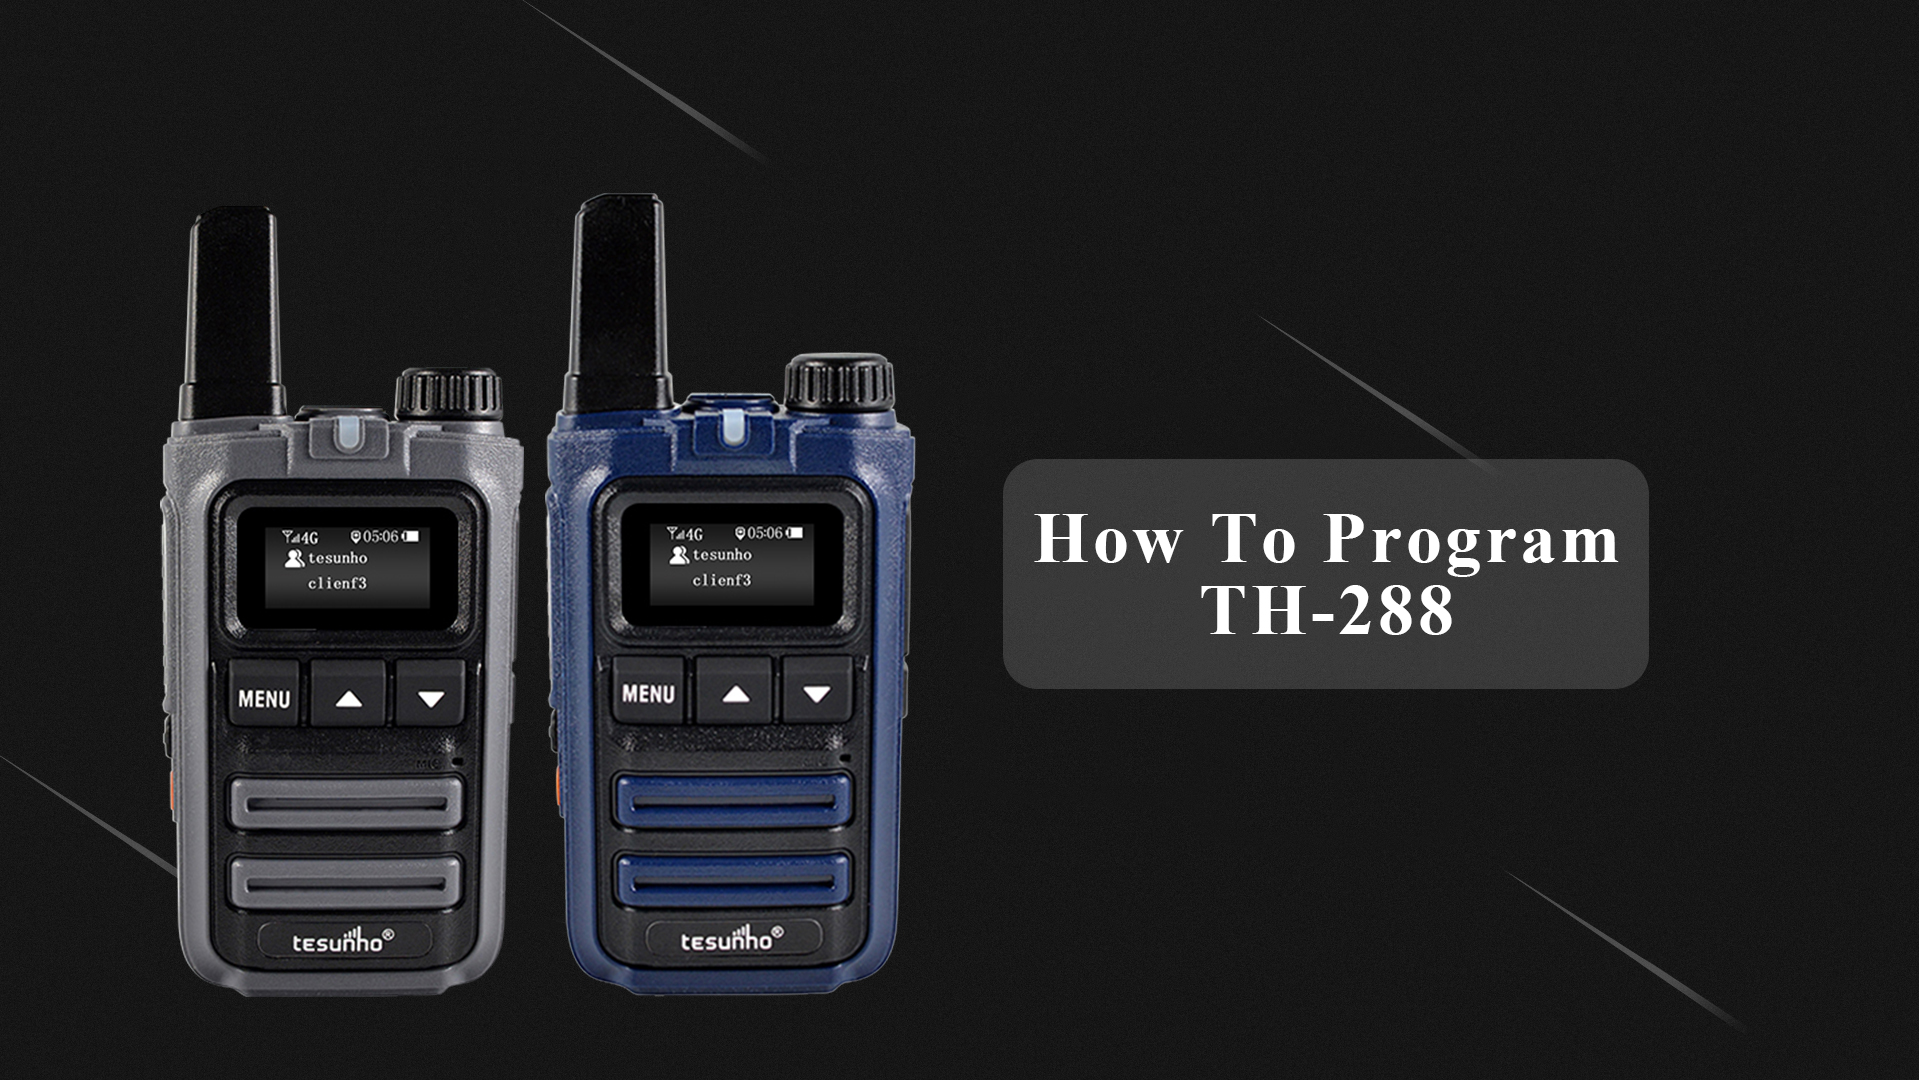 How To Program TH-288